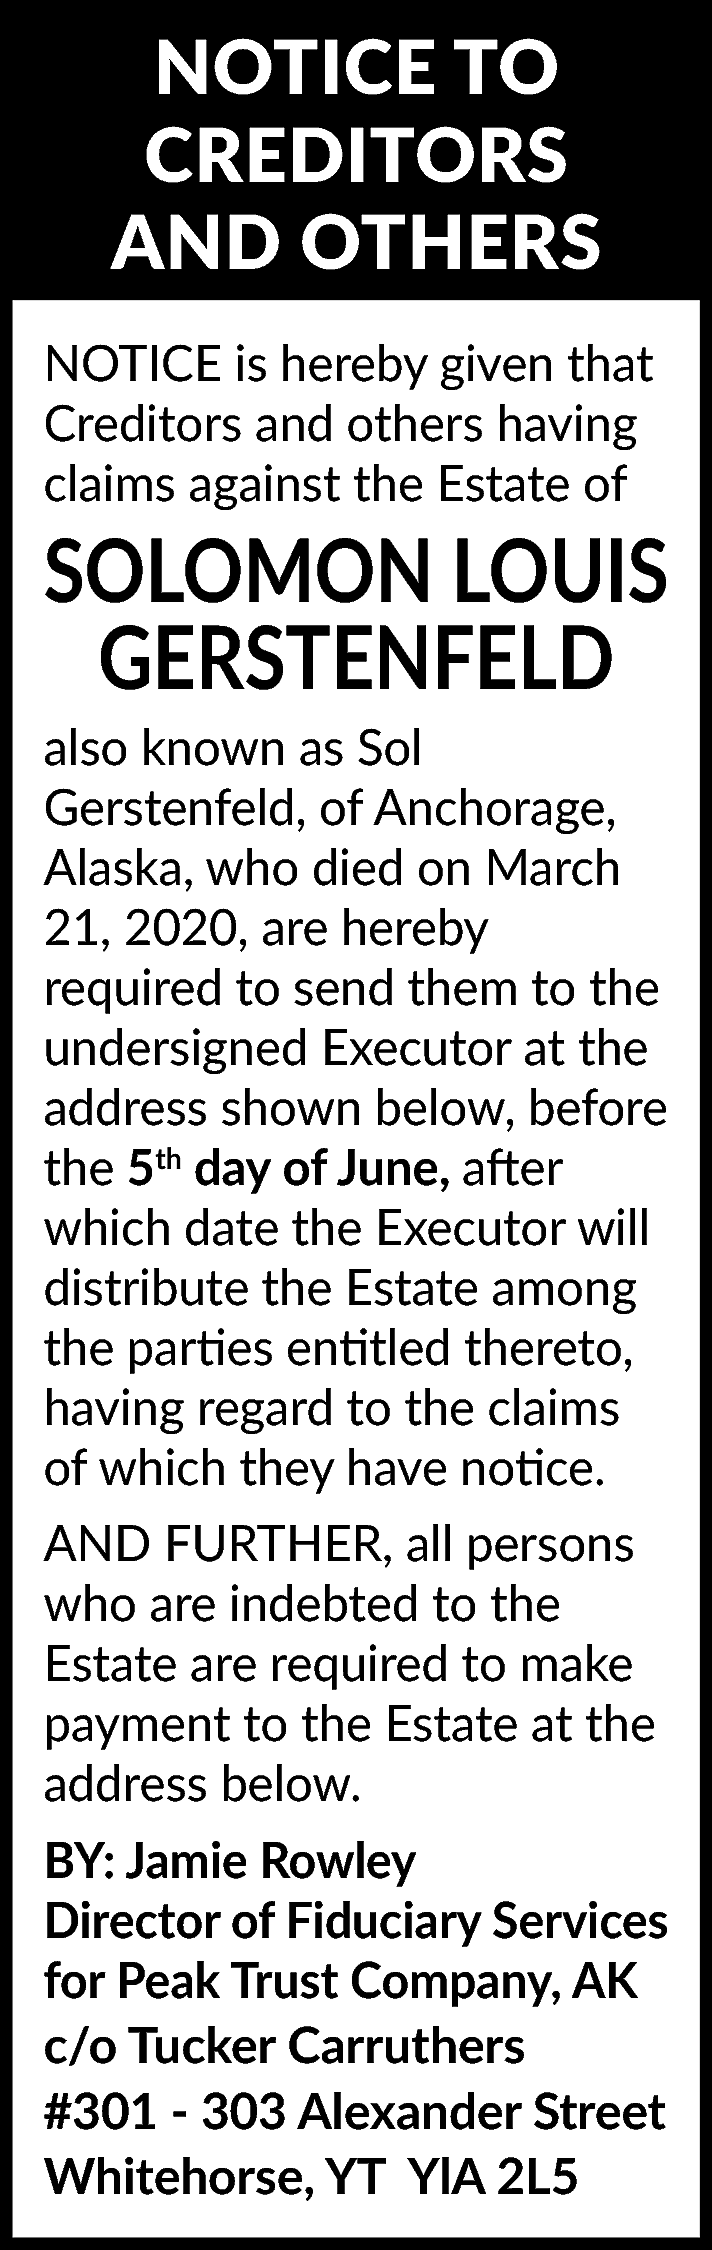 NOTICE TO <br>CREDITORS <br>AND OTHERS  NOTICE TO  CREDITORS  AND OTHERS  NOTICE is hereby given that  Creditors and others having  claims against the Estate of    SOLOMON LOUIS  GERSTENFELD    also known as Sol  Gerstenfeld, of Anchorage,  Alaska, who died on March  21, 2020, are hereby  required to send them to the  undersigned Executor at the  address shown below, before  the 5th day of June, after  which date the Executor will  distribute the Estate among  the parties entitled thereto,  having regard to the claims  of which they have notice.  AND FURTHER, all persons  who are indebted to the  Estate are required to make  payment to the Estate at the  address below.    BY: Jamie Rowley  Director of Fiduciary Services  for Peak Trust Company, AK  c/o Tucker Carruthers  #301 - 303 Alexander Street  Whitehorse, YT YlA 2L5    